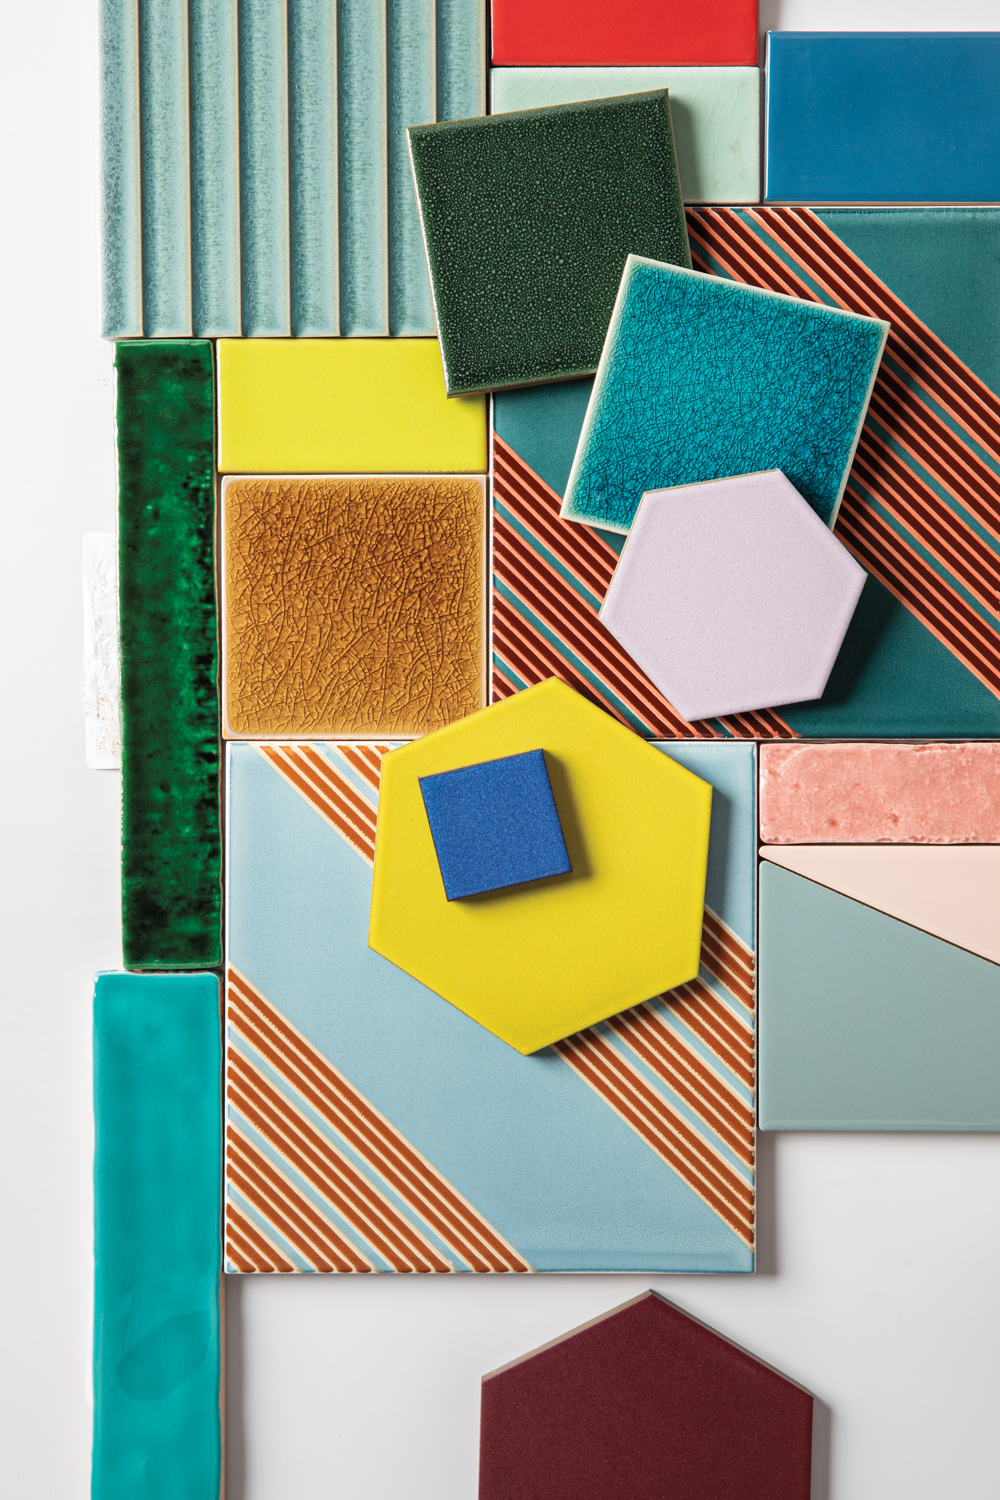 brightly colored tiles in various shapes